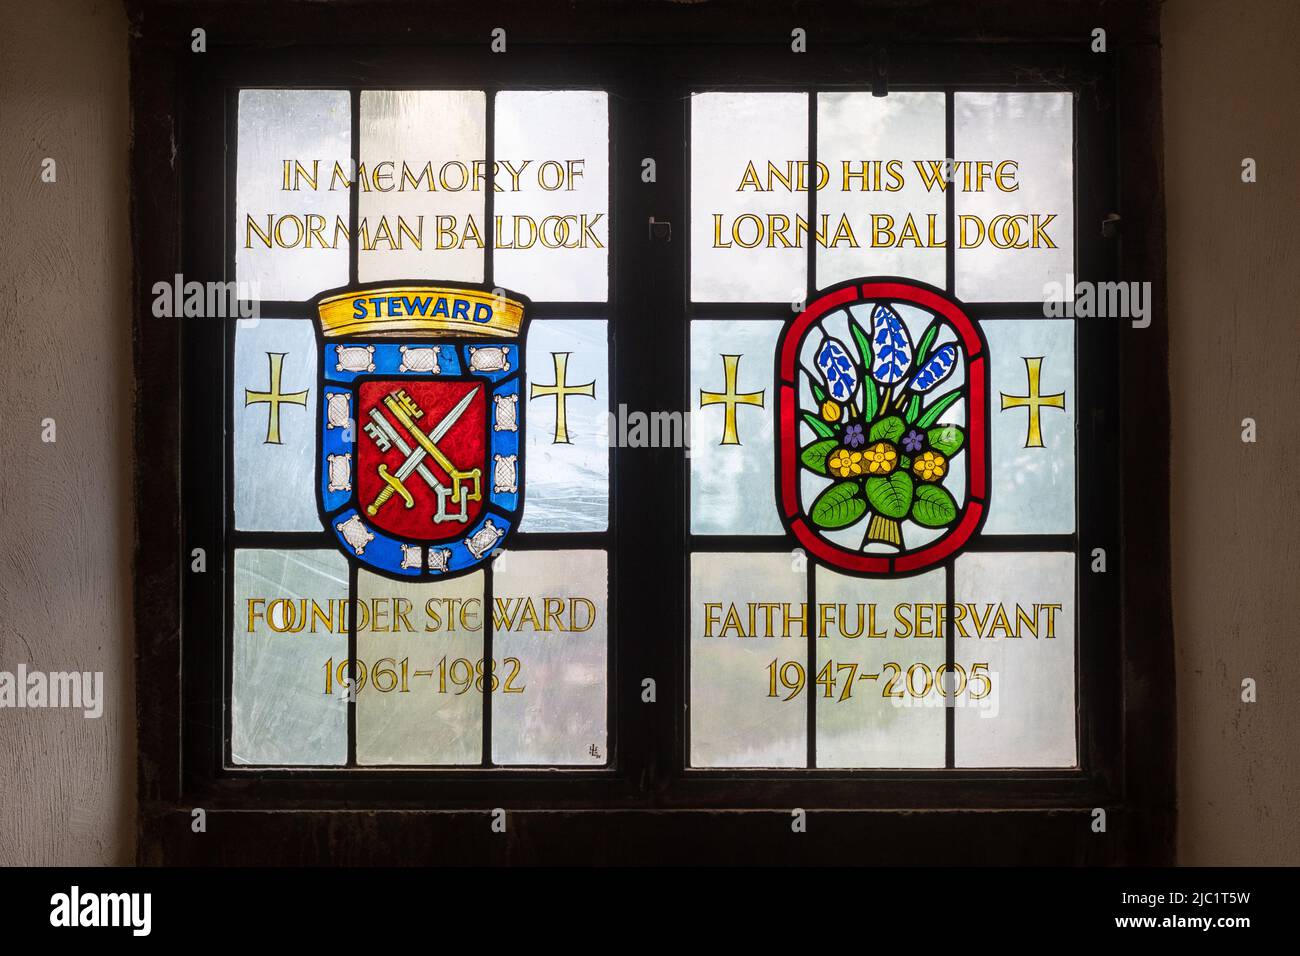 Stained glass window in memory of Norman Baldock and his wife Lorna Baldock, founder steward of Guildford Cathedral, Surrey, England, UK Stock Photo